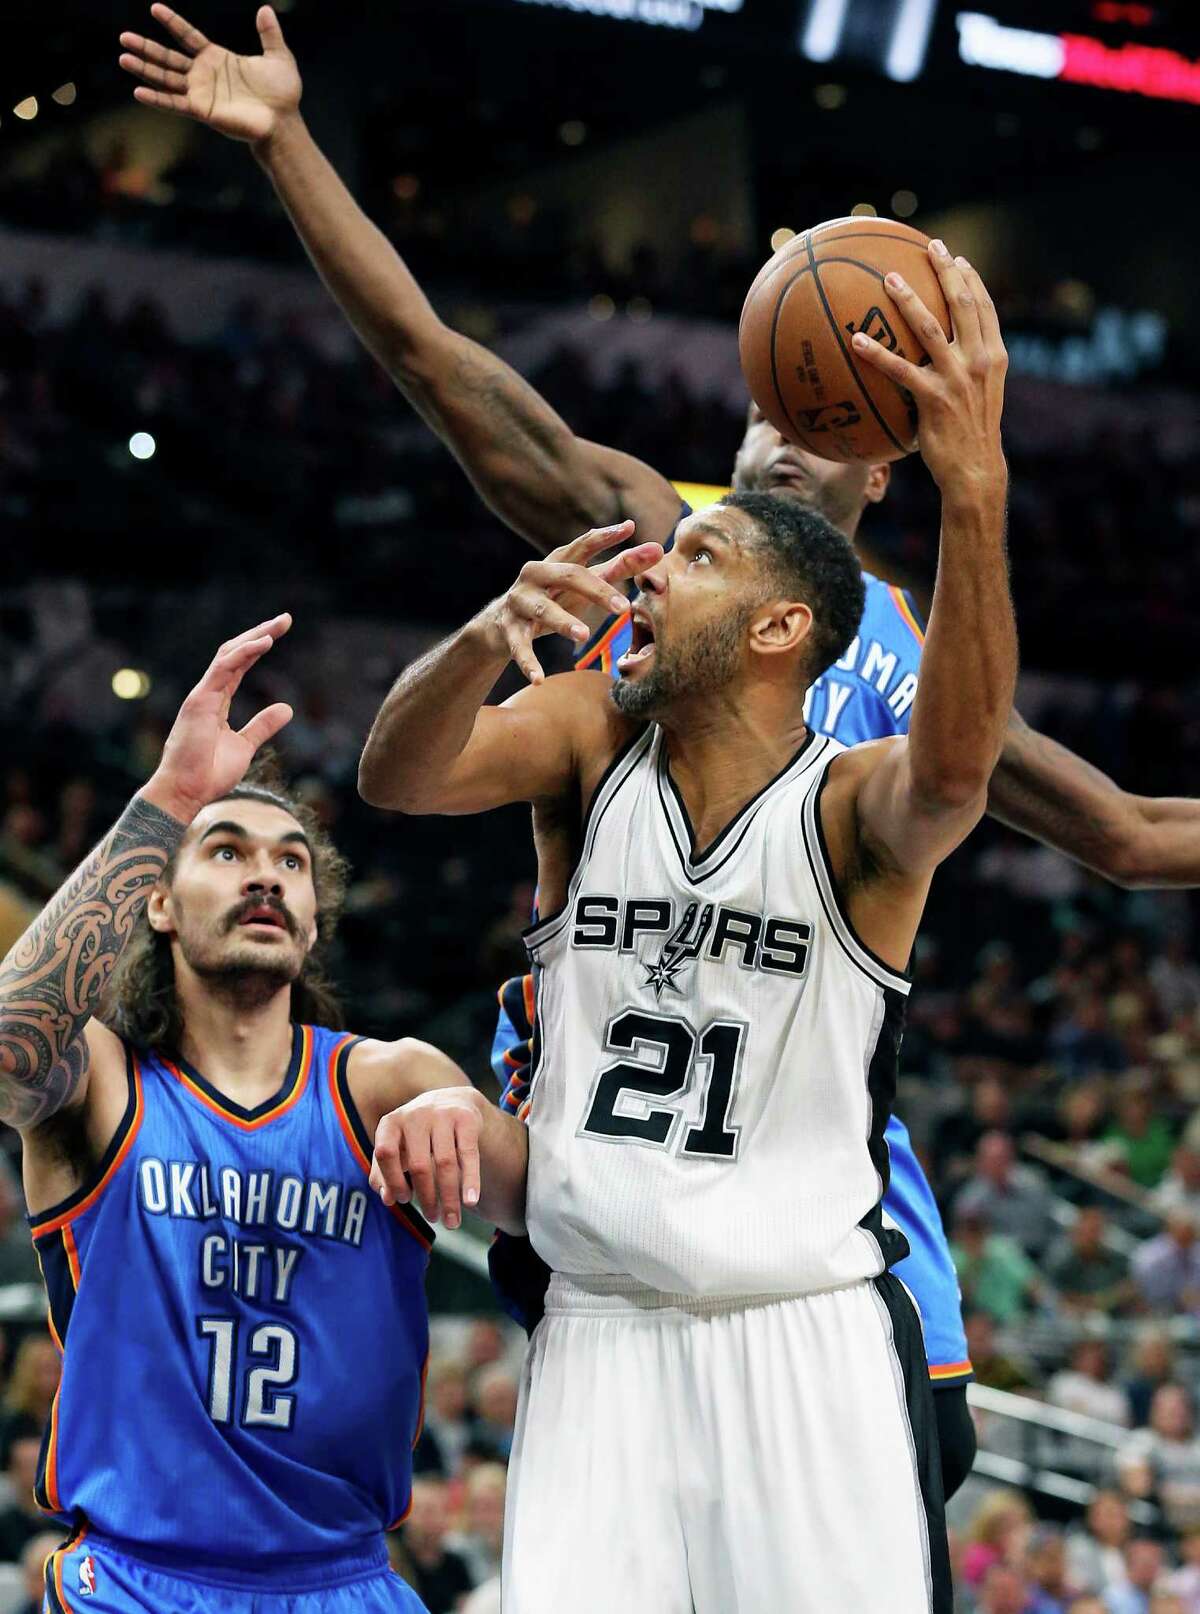 Tim Duncan gets off a shot in front of Steven Adams as the Spurs host Oklahoma at the AT&T Center on April 12, 2016.